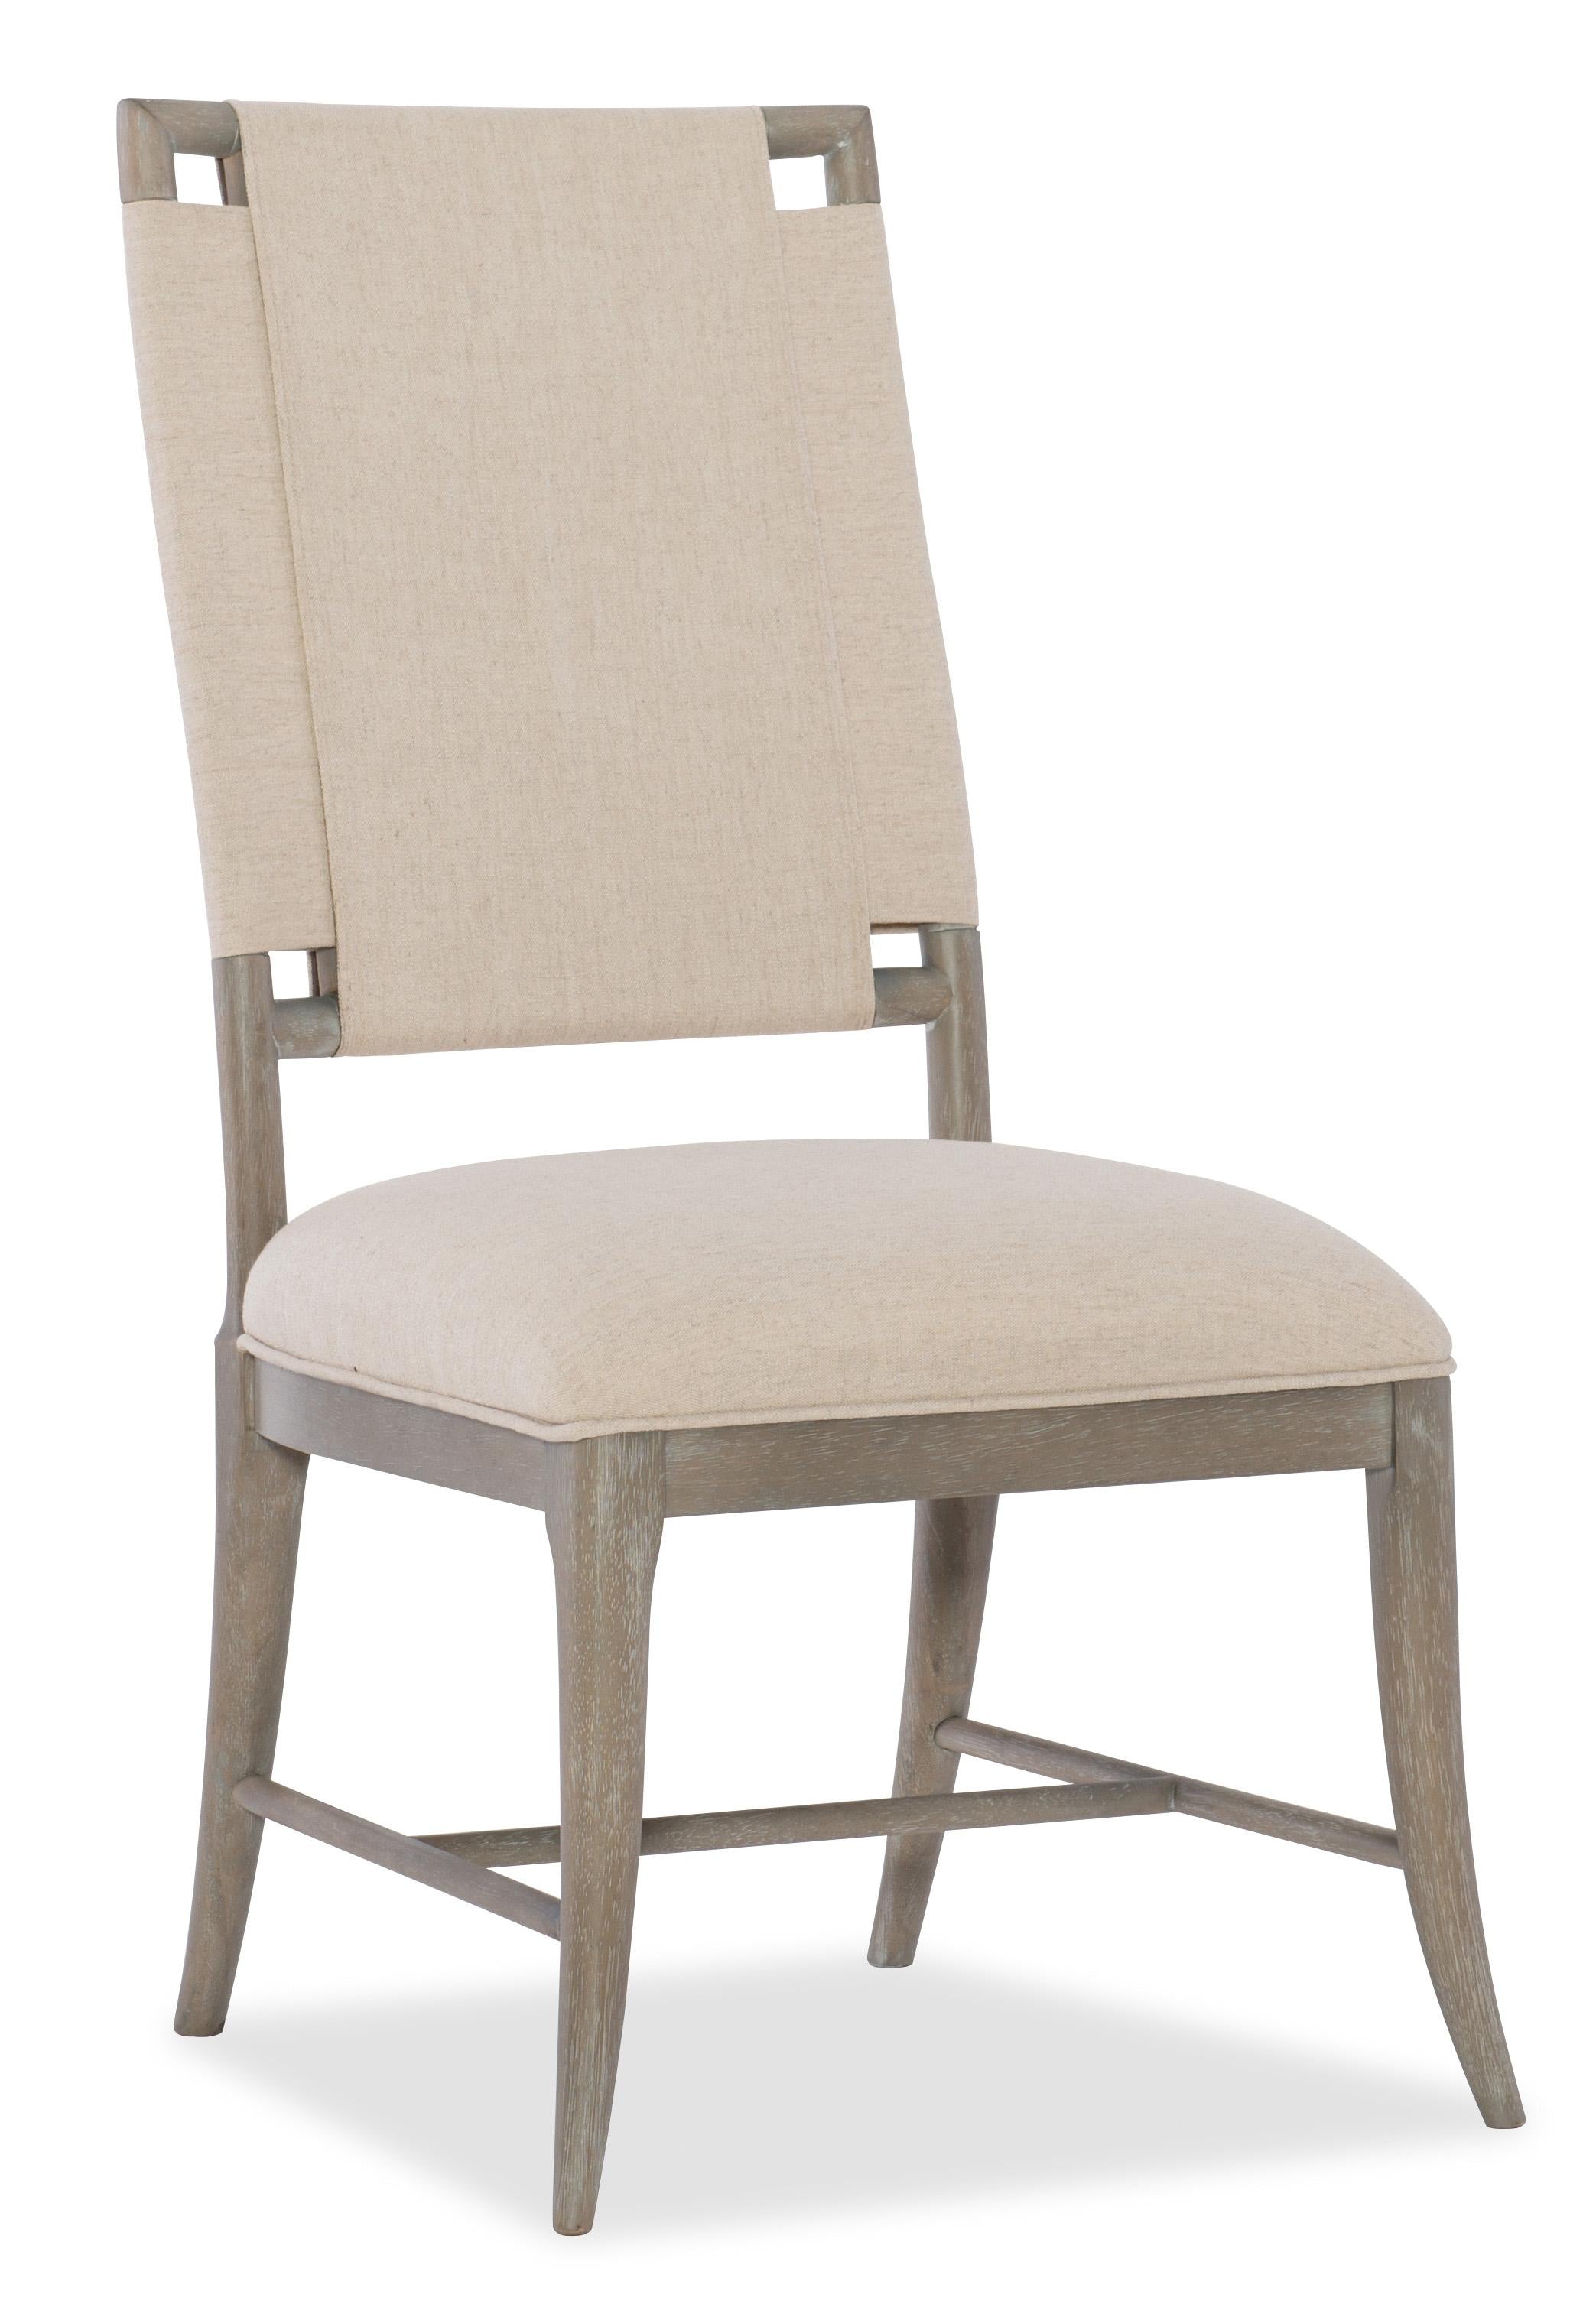 Affinity Upholstered Side Chair - 2 per carton/price ea